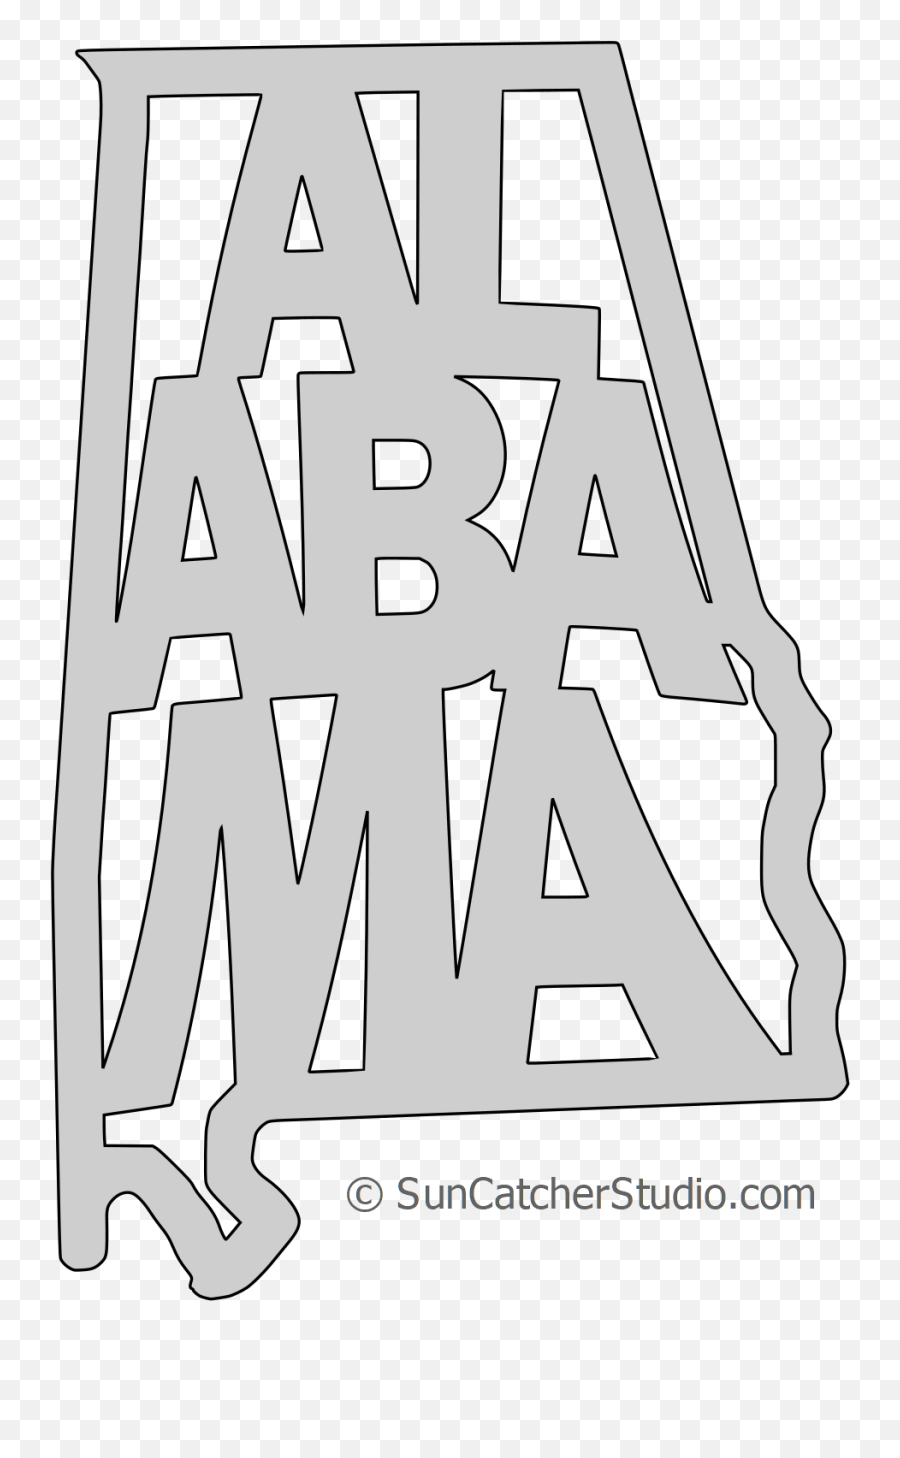 Alabama Map Shape Text Outline Scalable Vector Graphic Emoji,Alabama Clipart